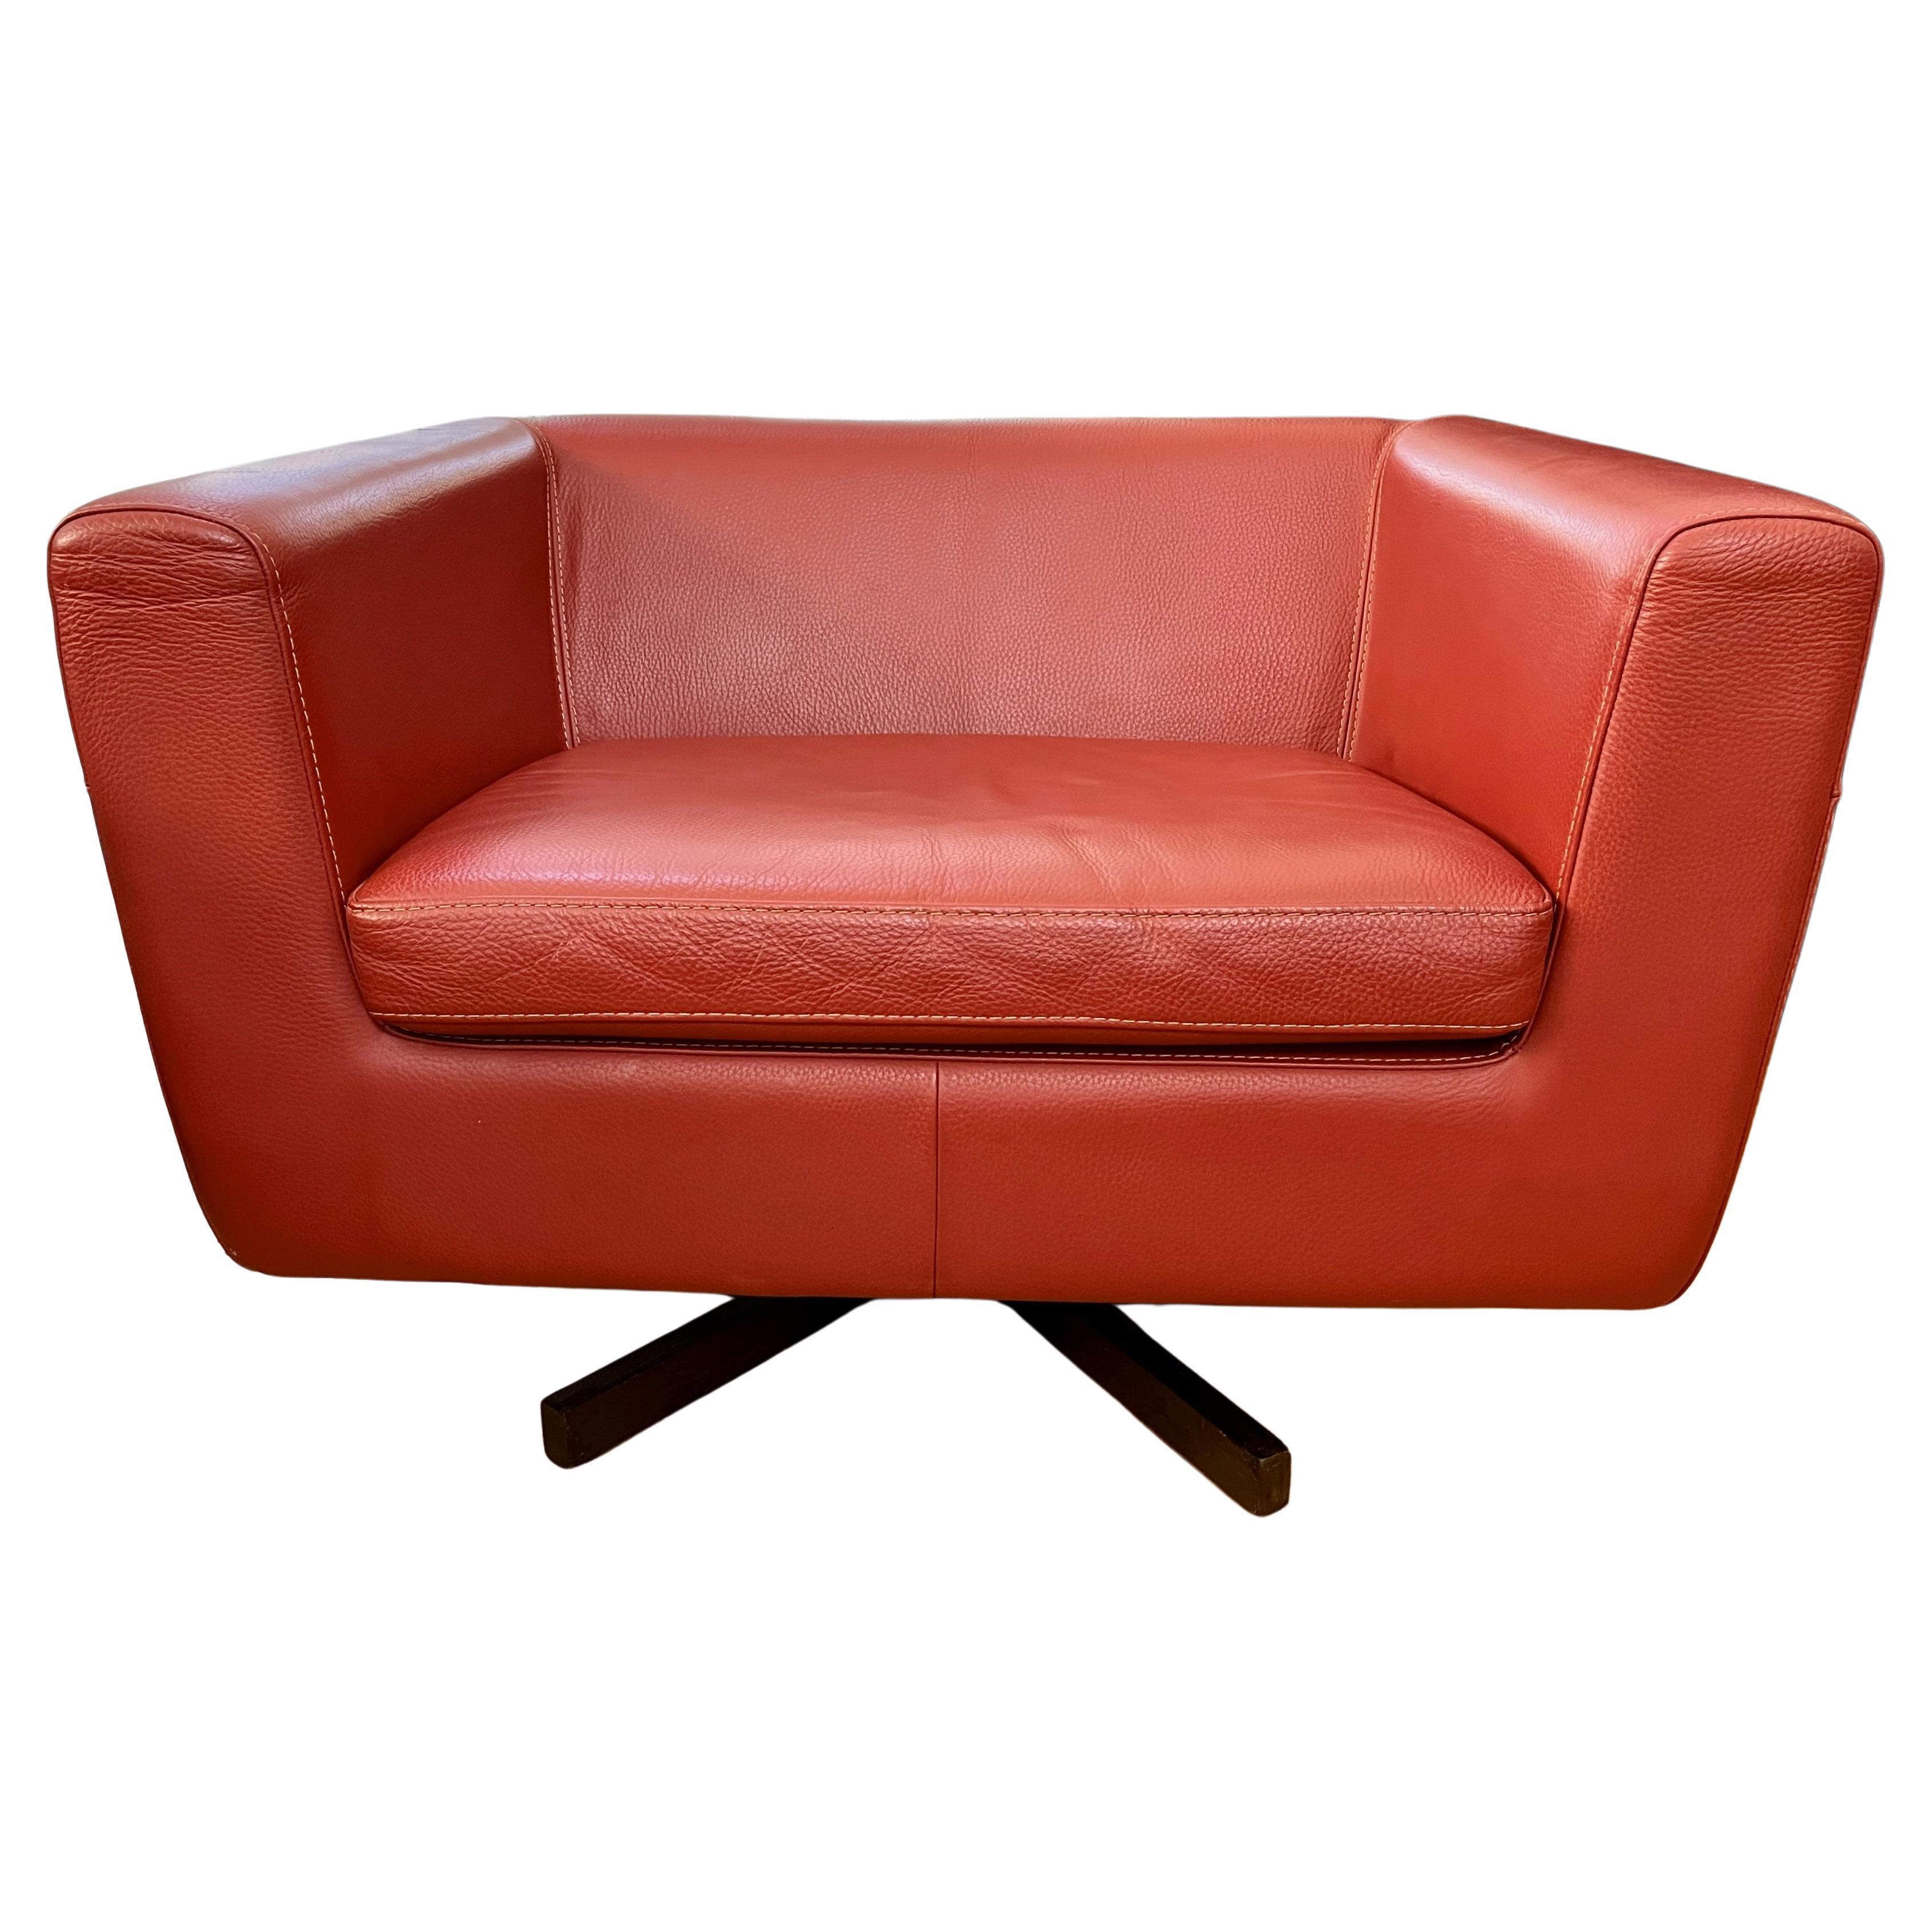 Roche Bobois Swivel Armchair features Brick Red Leather, Contrast Stitching, 360 Degree Rotating Wooden 5 Leg Swivel Base, One Chair Cushion and One Pillow. Very comfortable deep seating. 